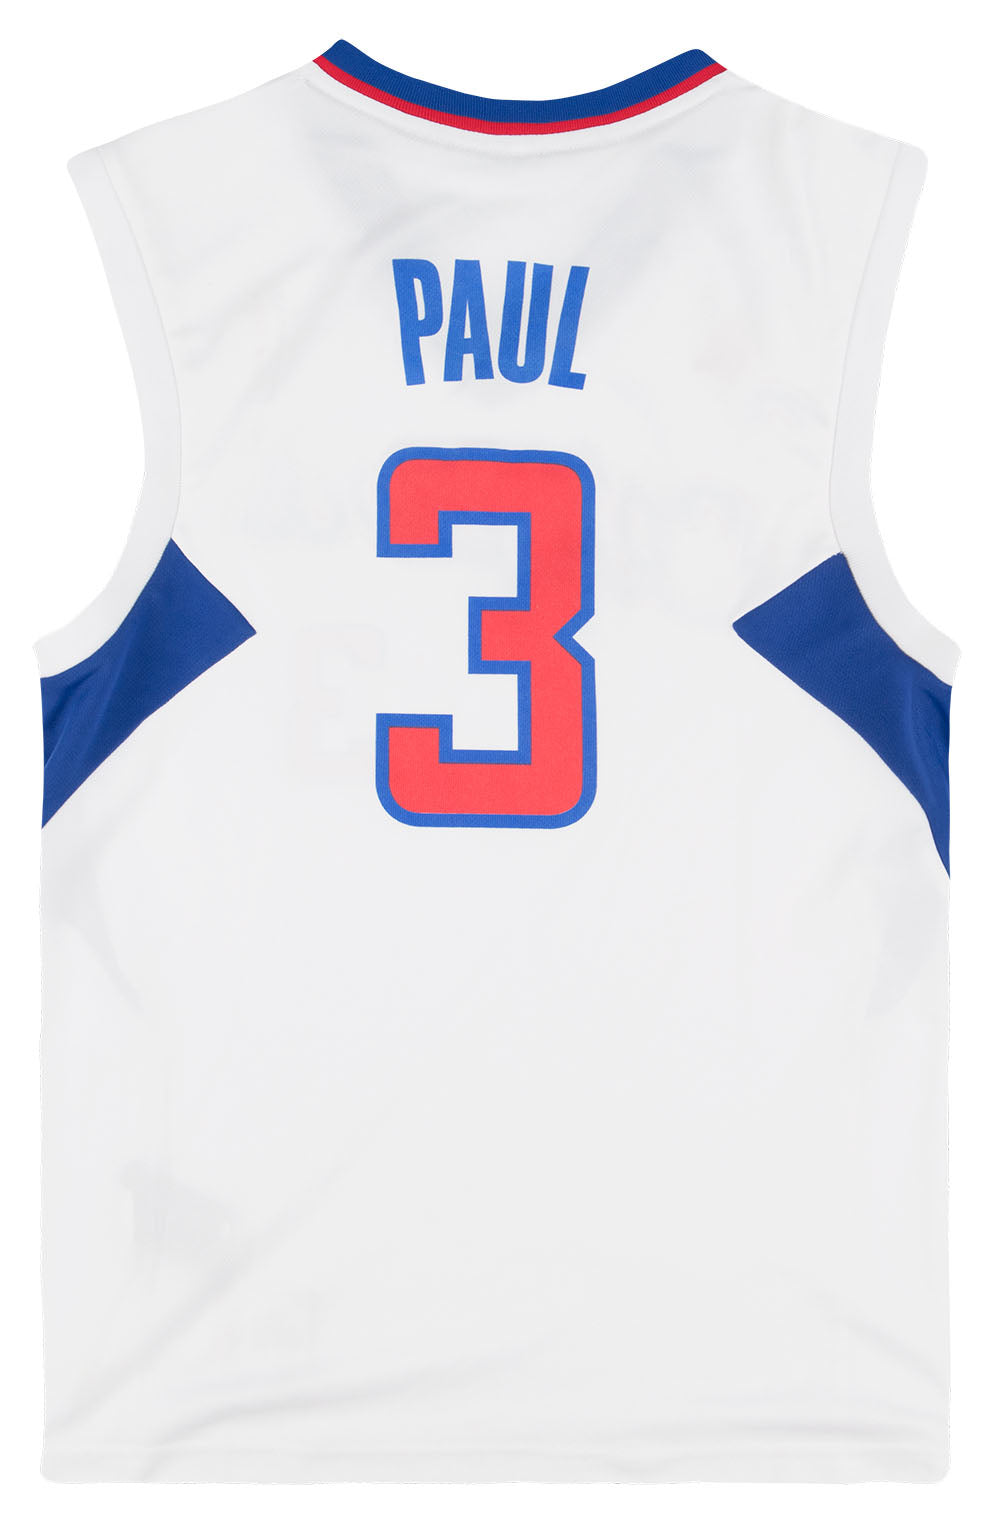 2011-14 LA CLIPPERS PAUL #3 ADIDAS JERSEY (HOME) L - Classic American Sports